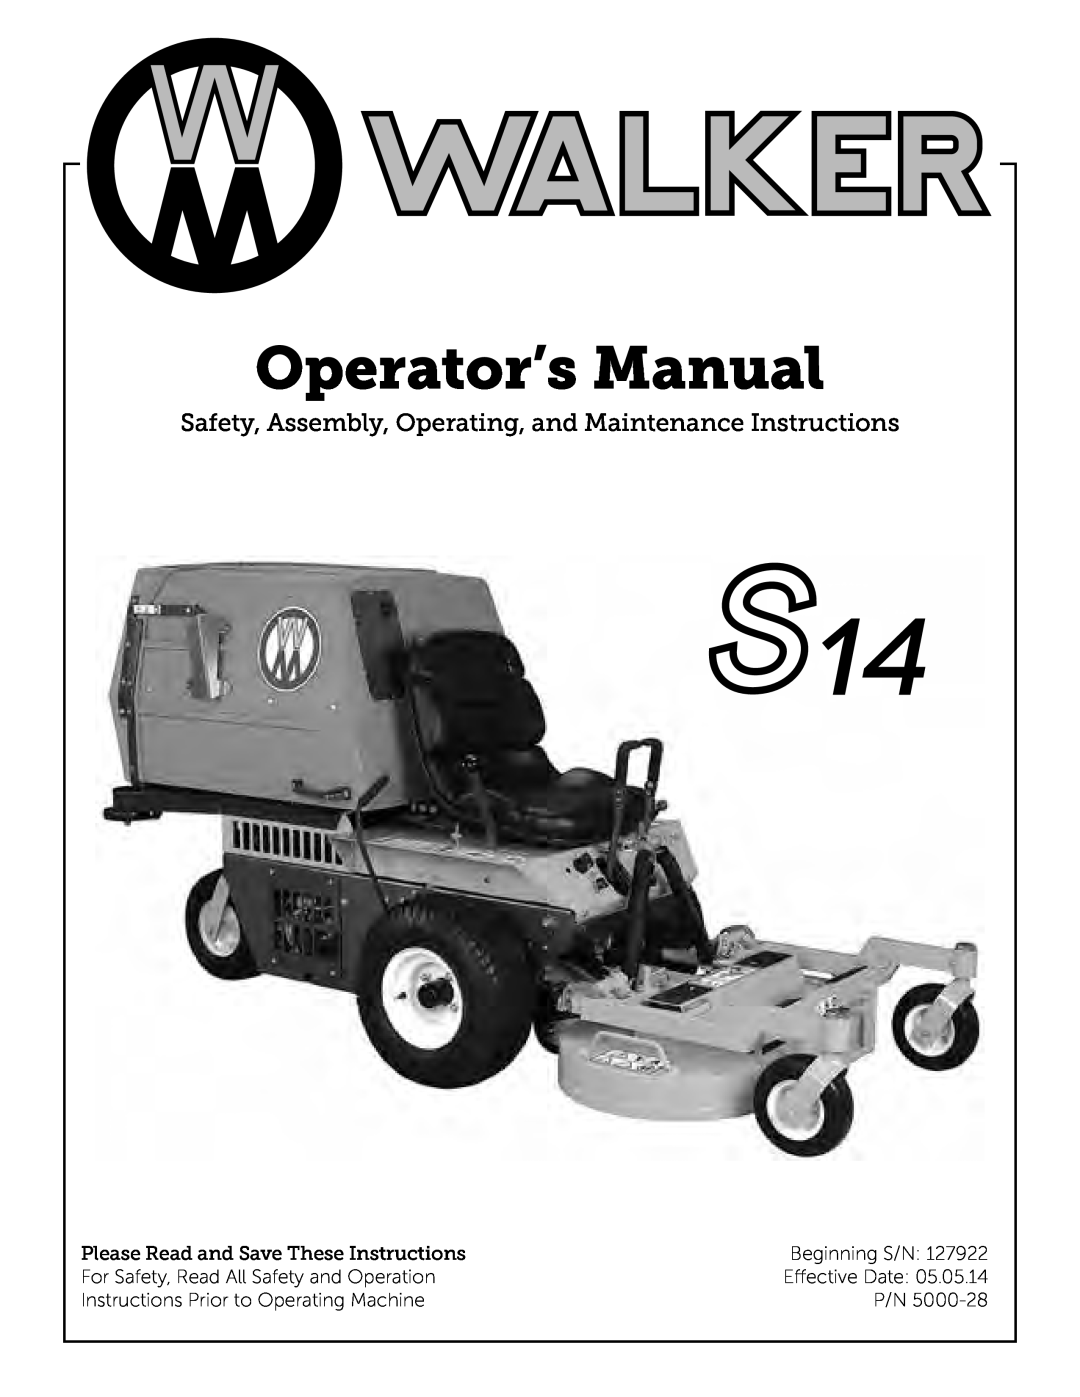 Walker S14 manual Operator’s Manual, Please Read and Save These Instructions, Beginning S/N, Effective Date 